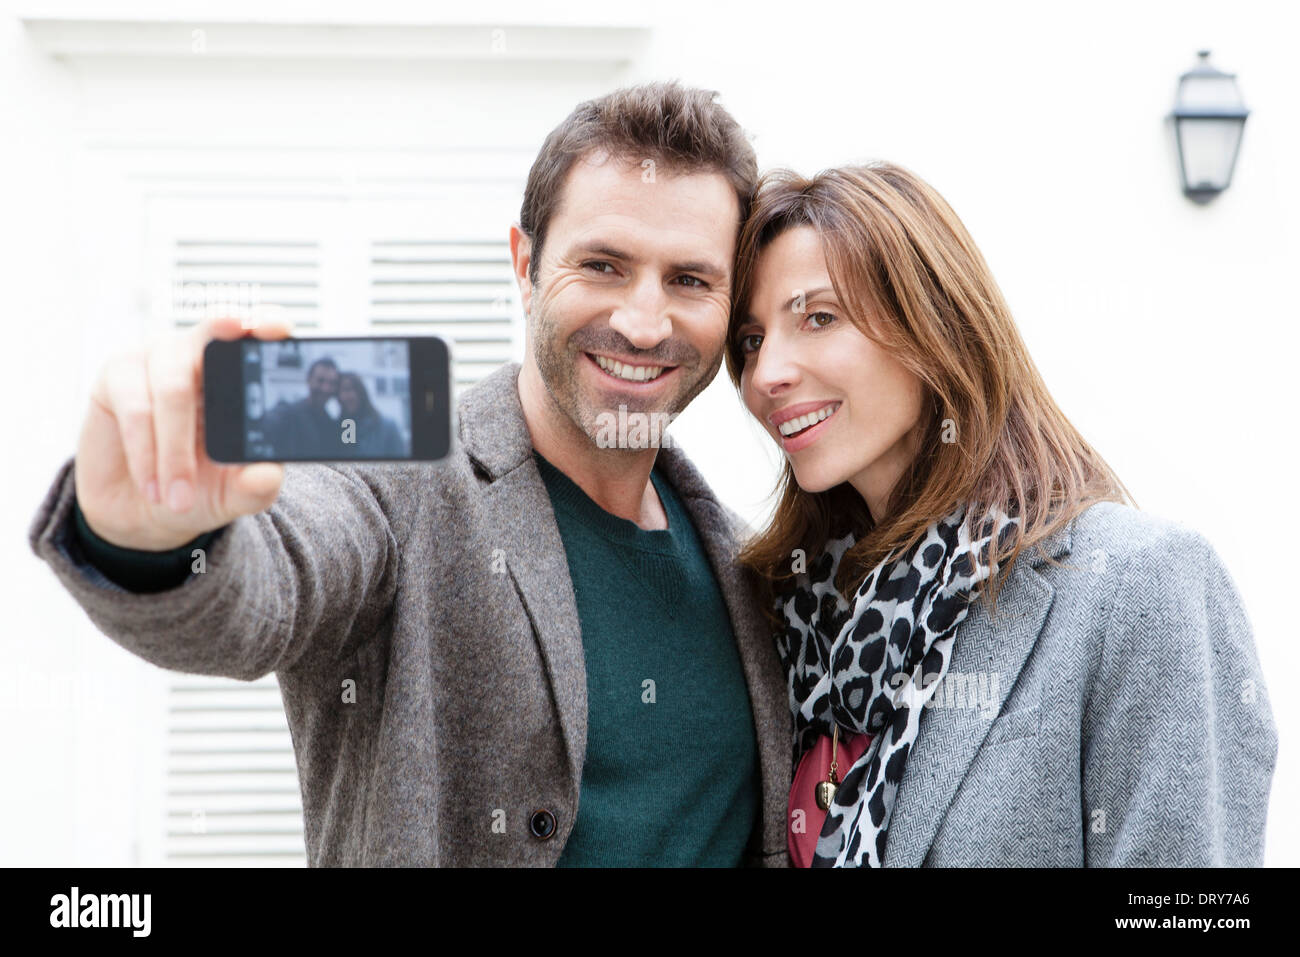 Couple taking self portrait with camera phone Stock Photo